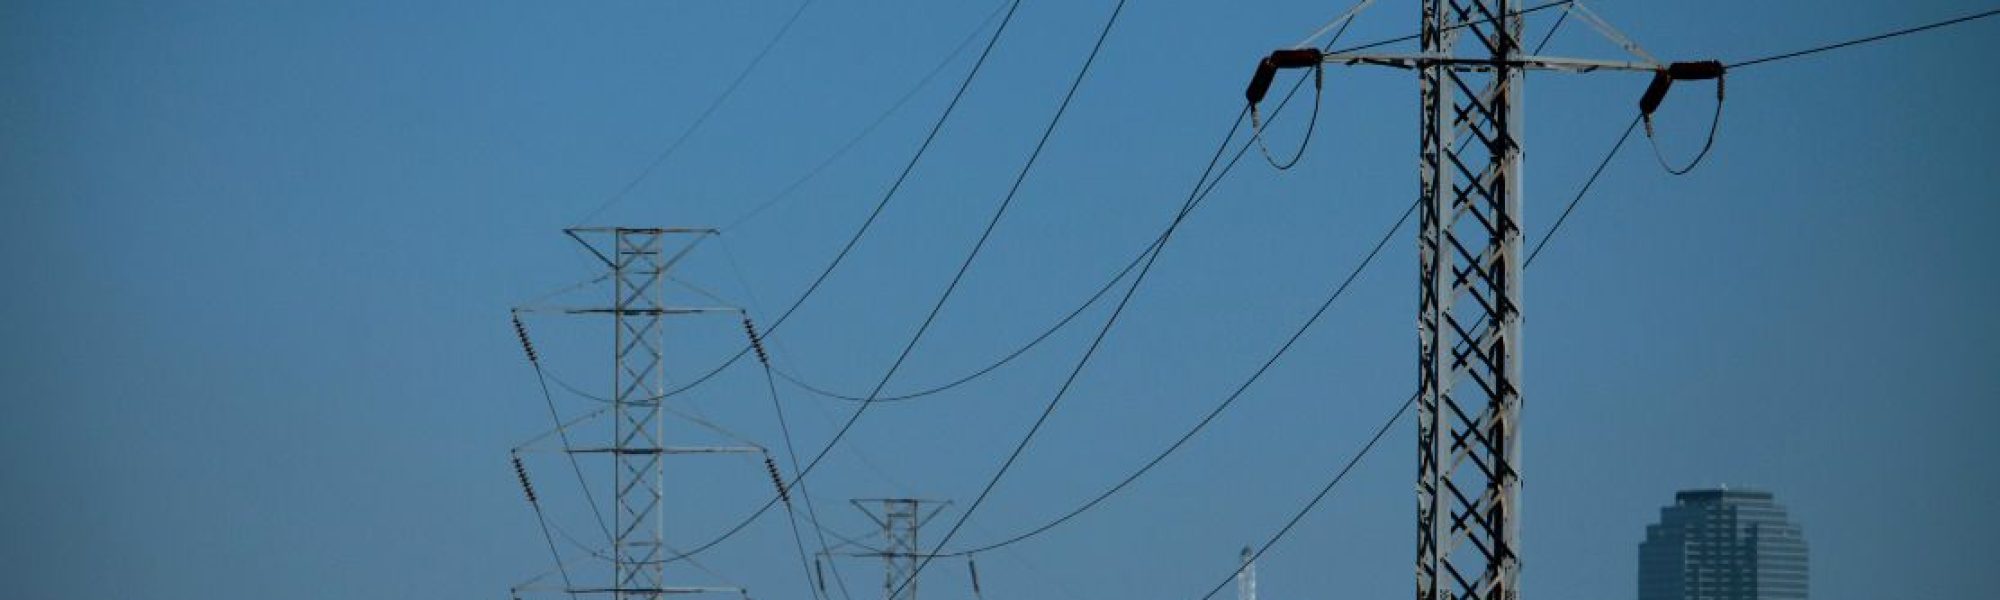 Do-nothing plan for Texas grid could leave us in the dark